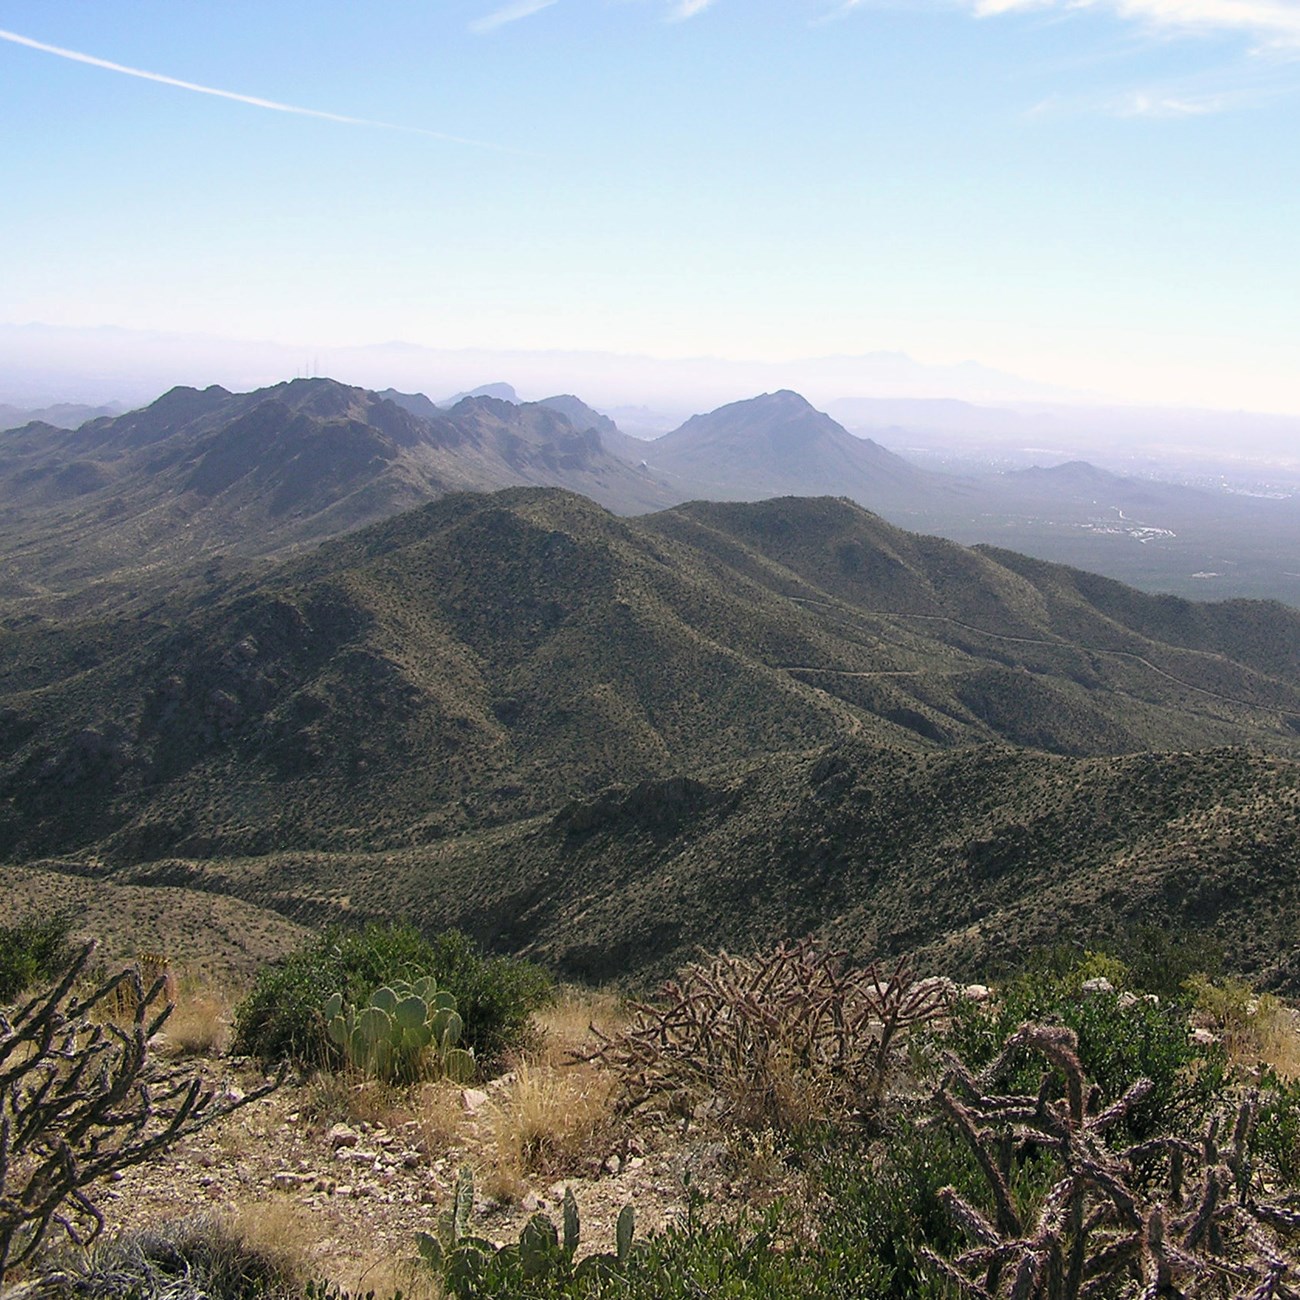 Photo of rugged desert peaks with cacti in the foreground